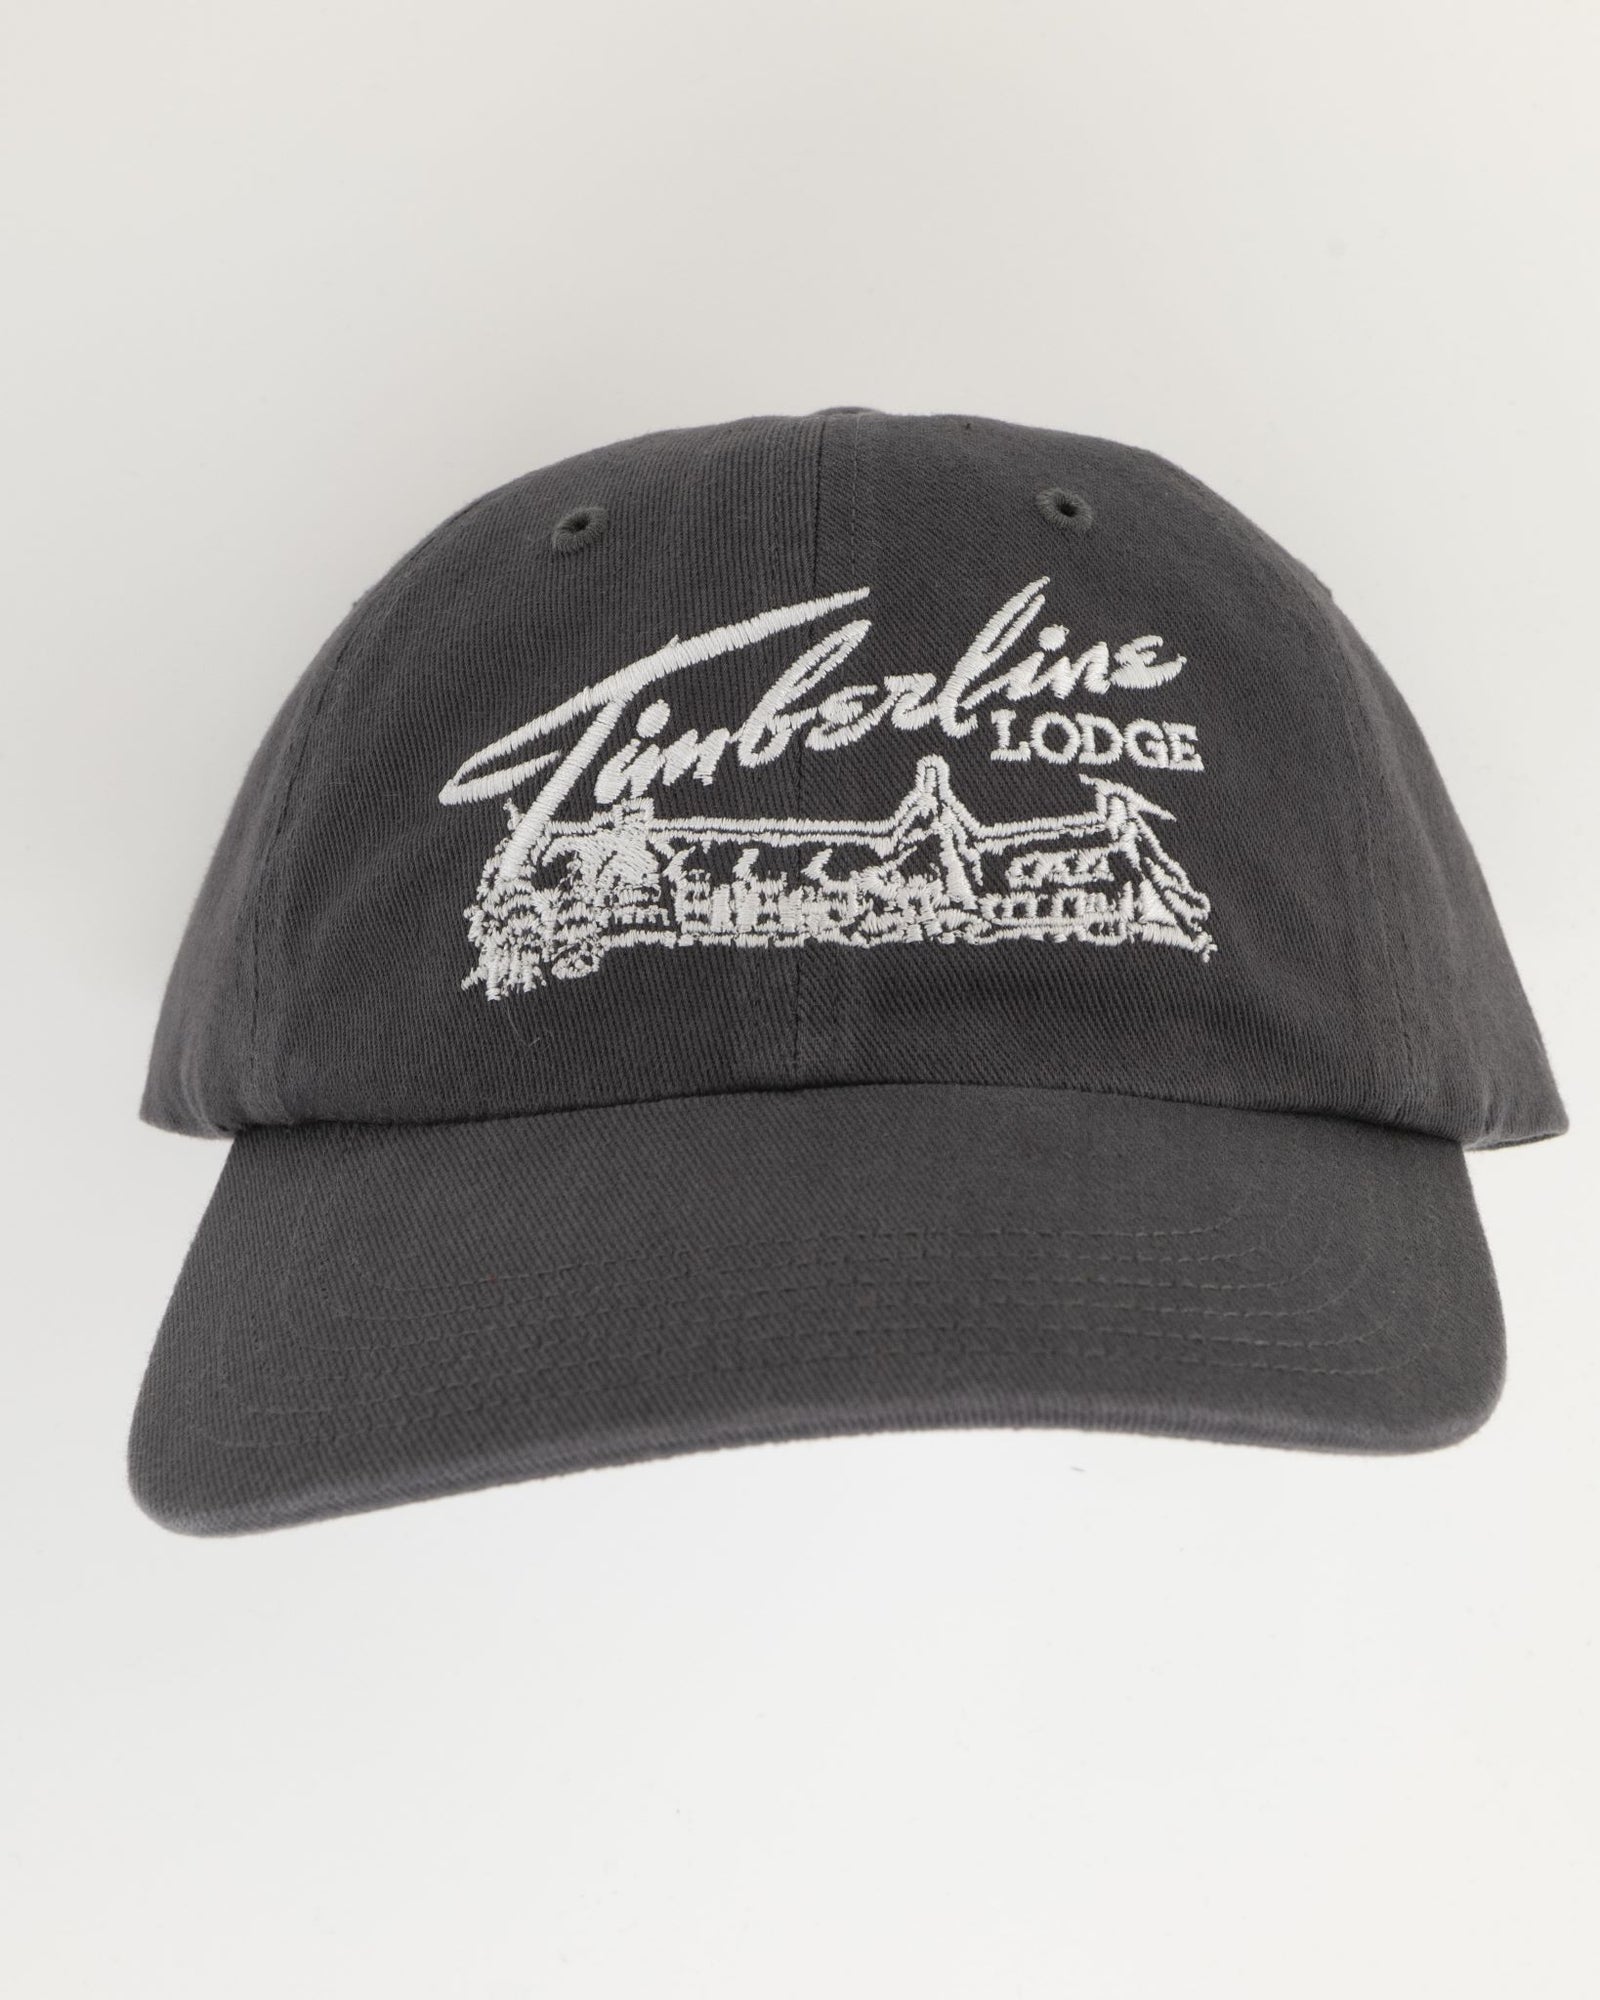 Hat - Iconic Cap Lodge - Online Blue Store Navy - Timberline